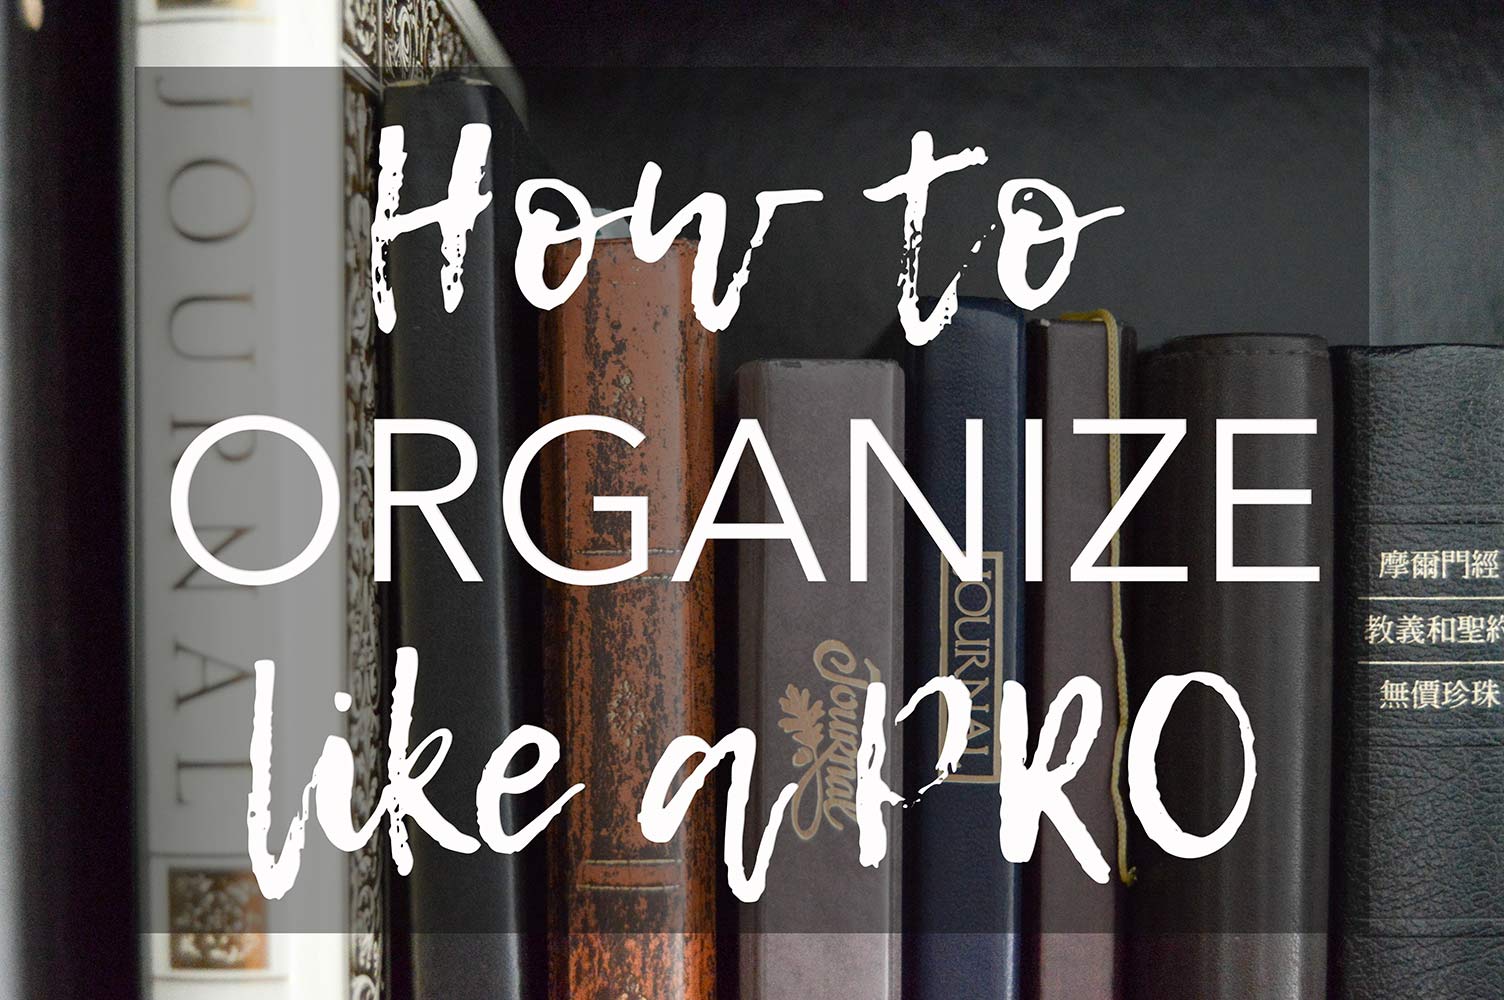 Tips for how to purge and organize your home like a pro. Organizing steps: categorizing and finding homes for things. 5 home organizing rules to live by.